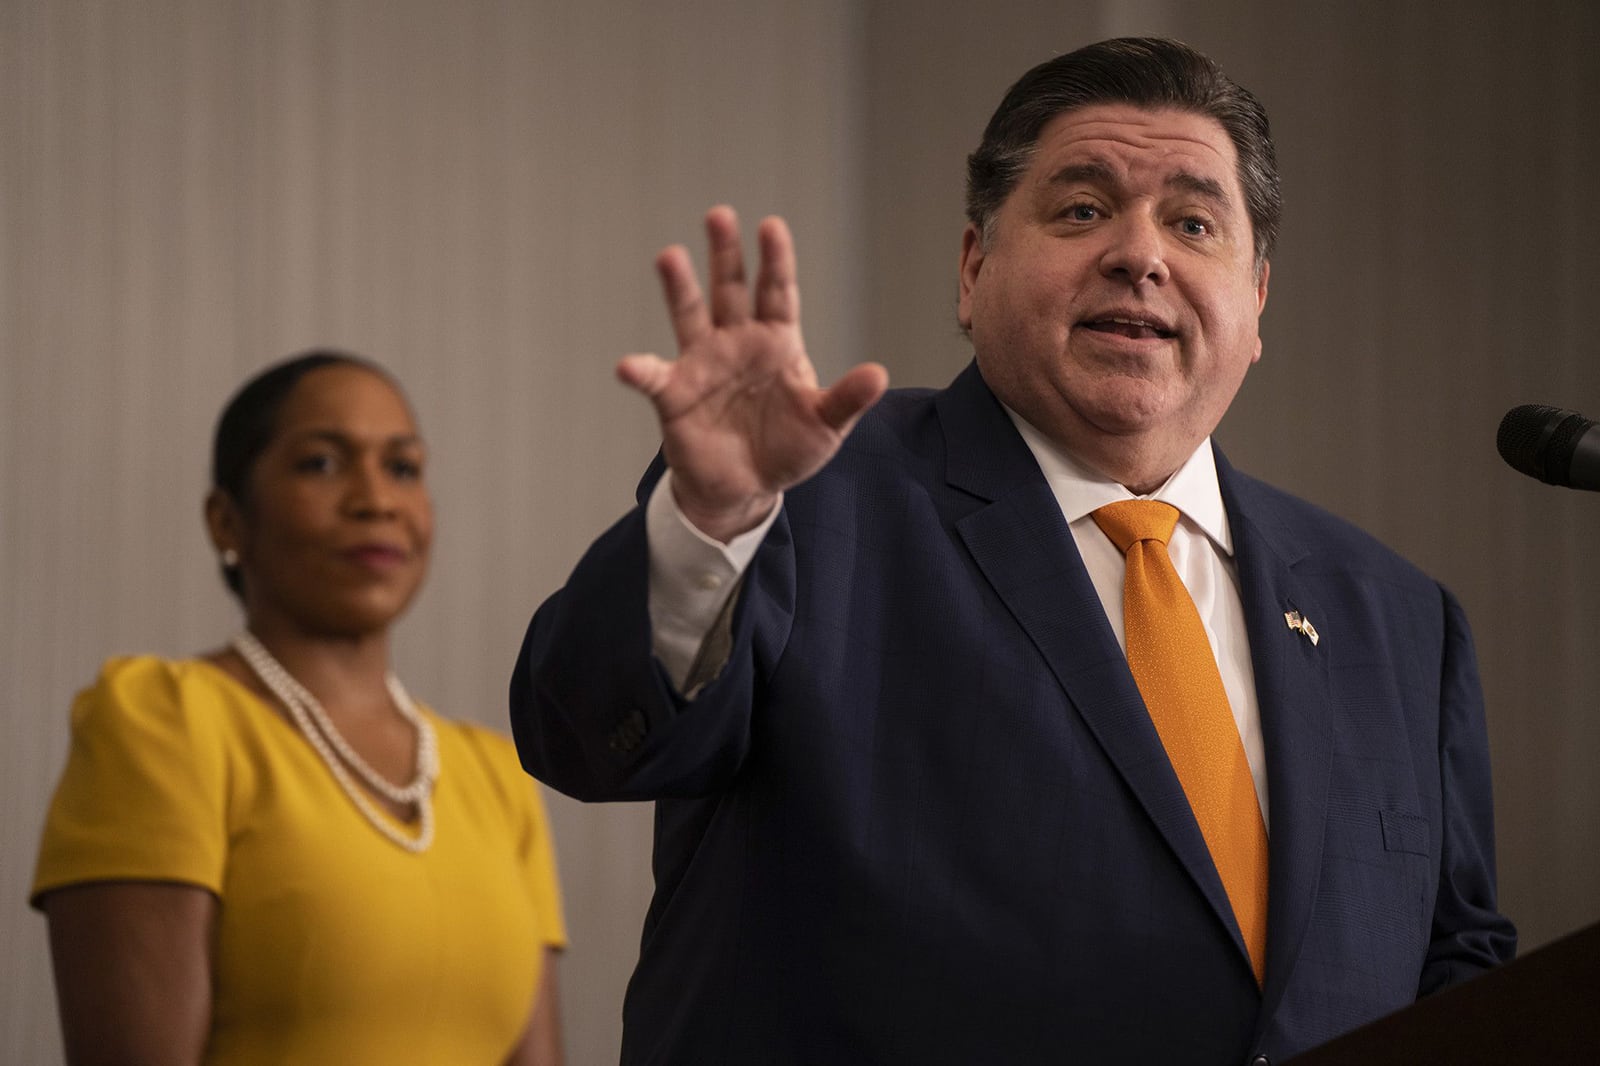 Illinois Gov. J.B. Pritzker is speaking at a microphone, facing the camera with his hand in the air. Lt. Gov. Juliana Stratton is seen in the background look at Pritzker.